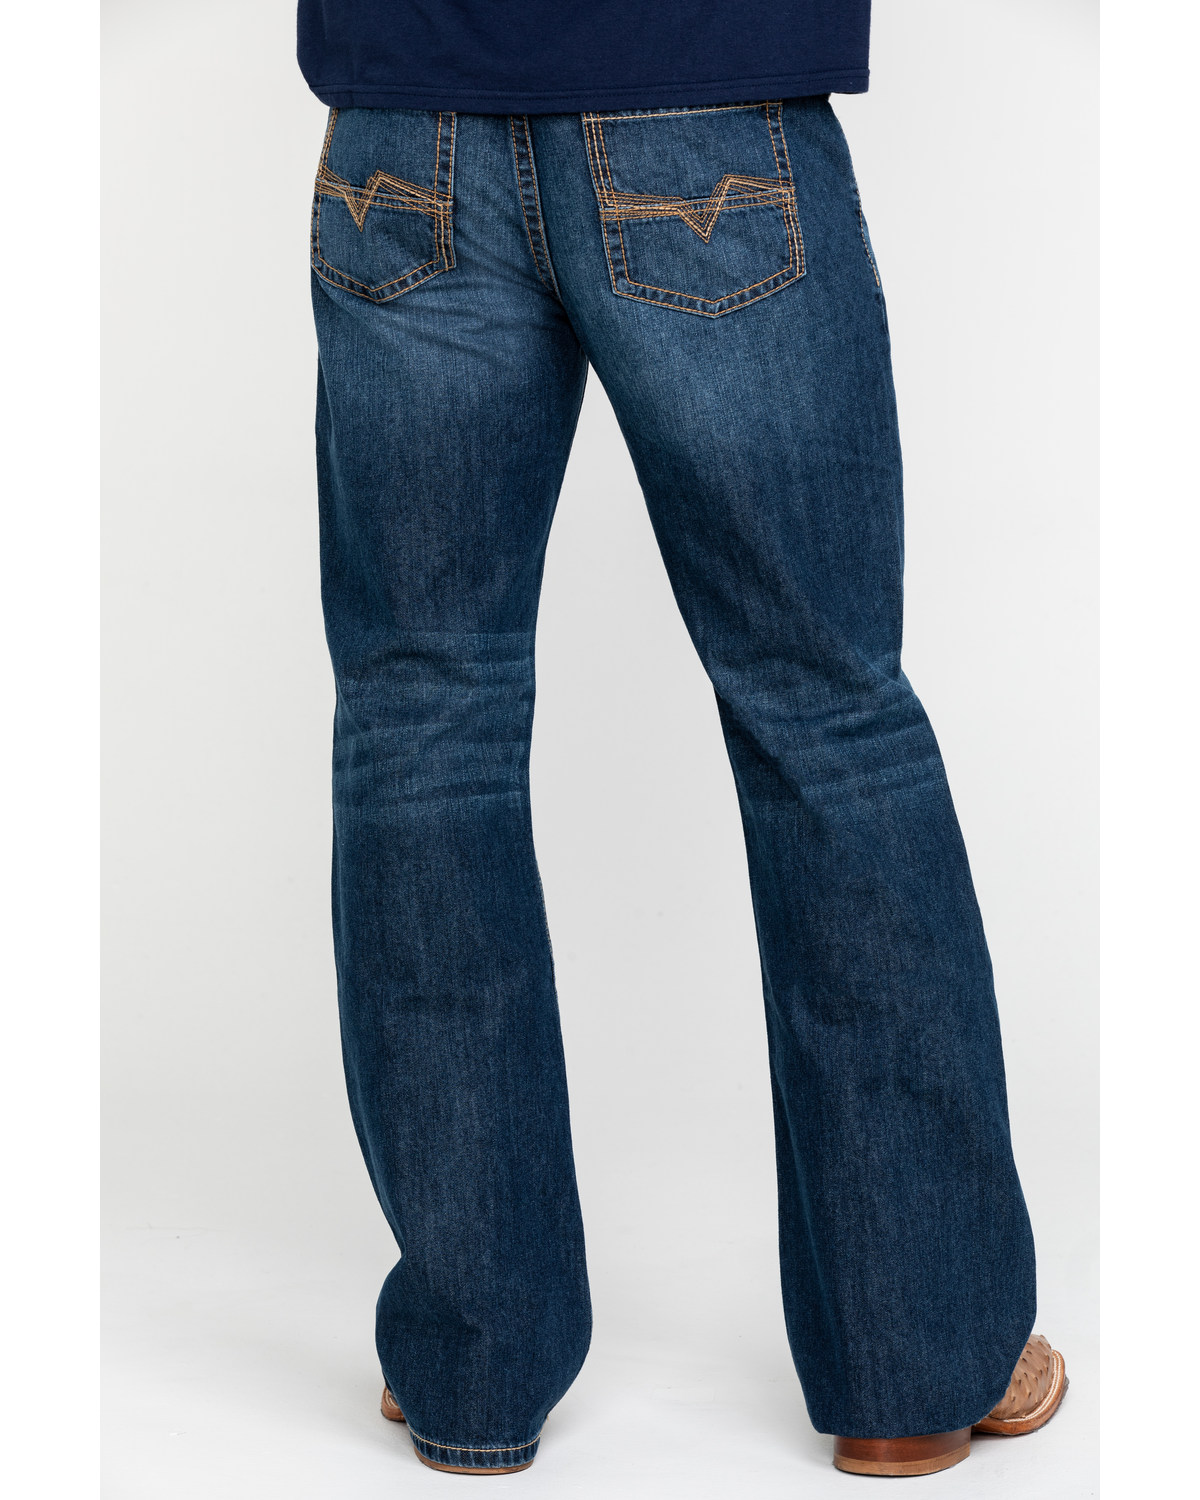 women's relaxed bootcut jeans